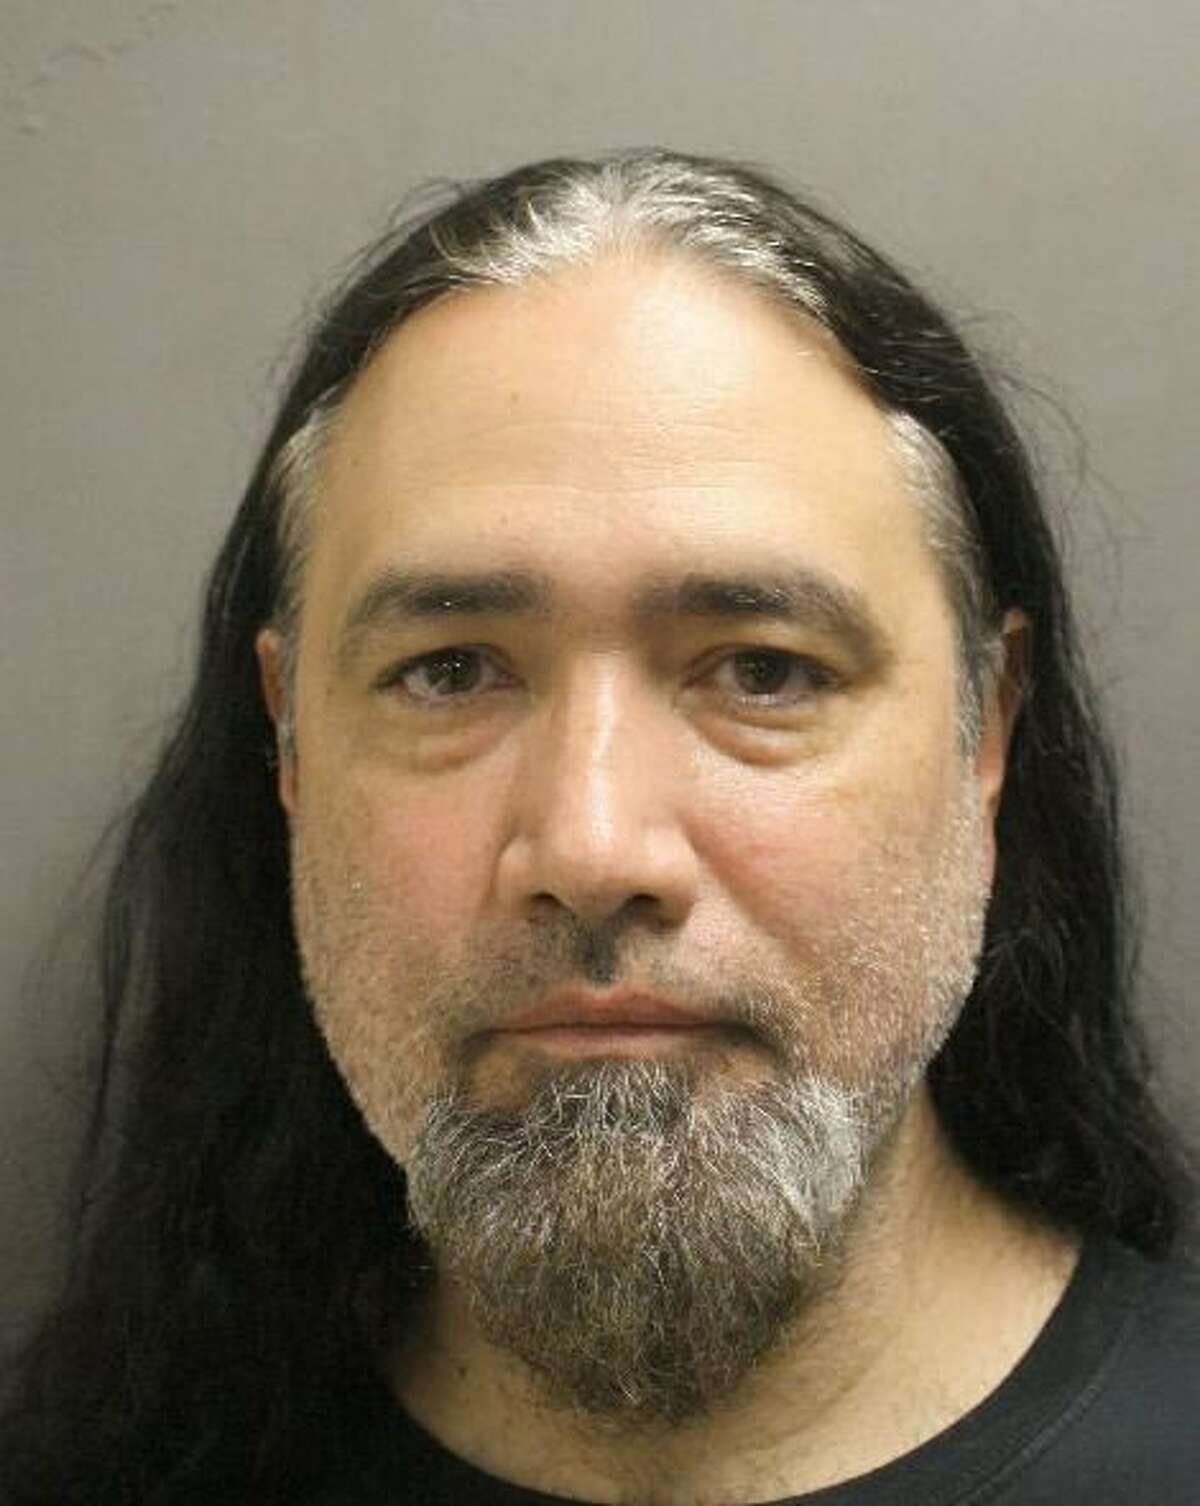 John Guerrero, 48, was arrested Monday after he allegedly left his 11-year-old daughter home alone in Houston while he traveled to Detroit for a concert.